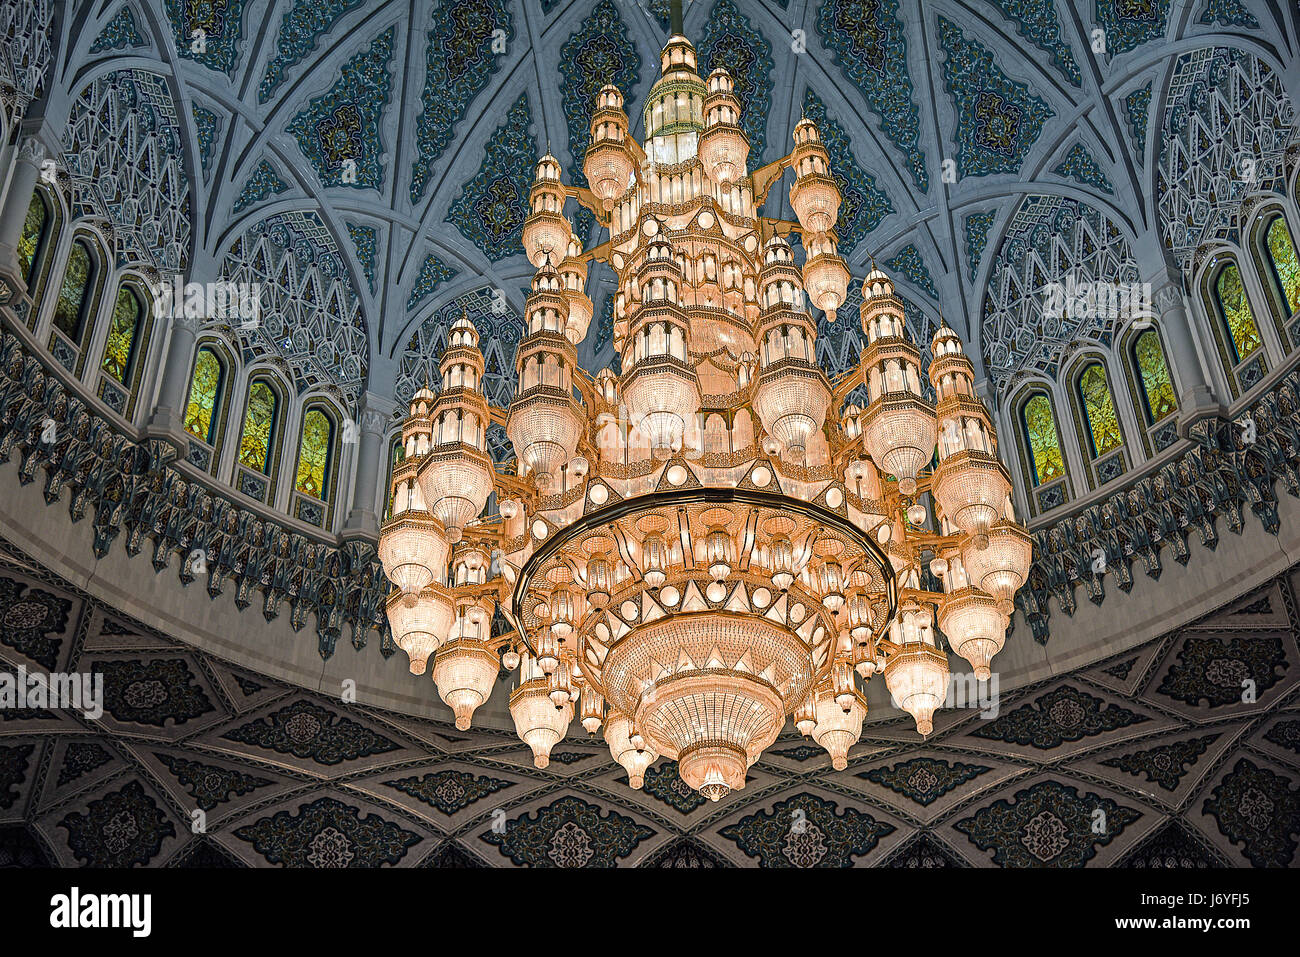 Oman Muscat The great chandelier at Sultan Qaboos Mosque Stock Photo